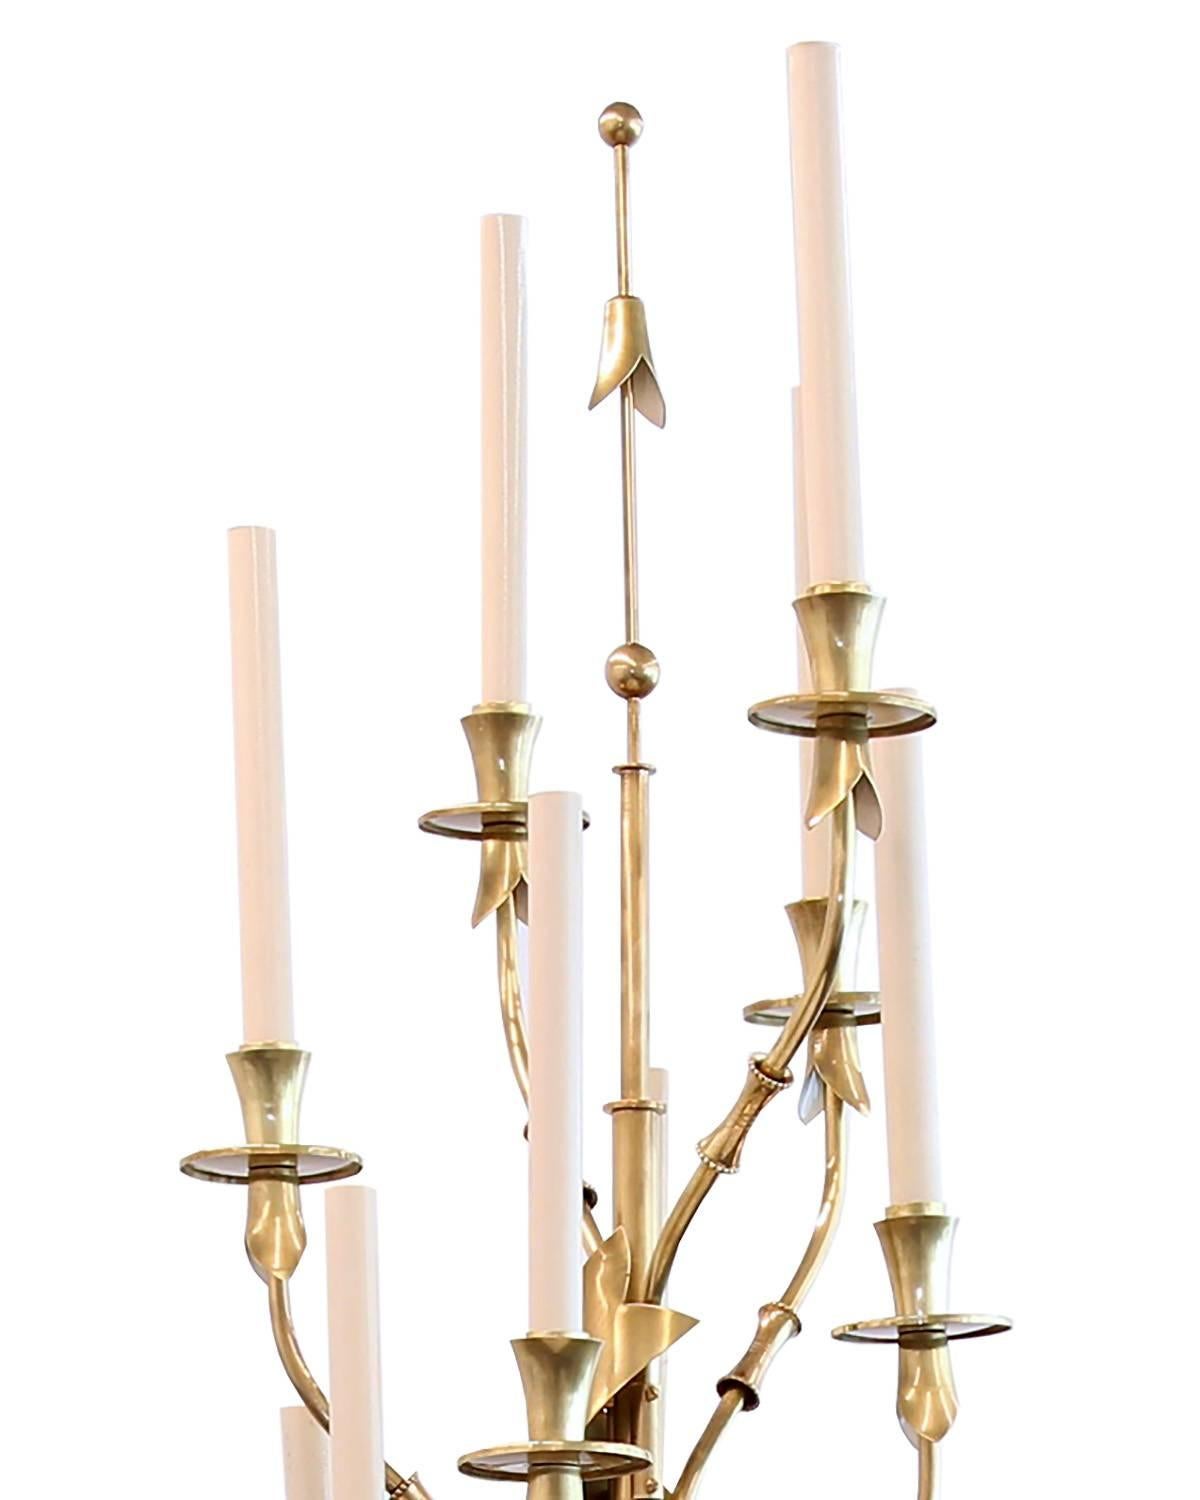 Italian Fully Restored Pair of Brass and Marble Floor Lamps by Stilnovo, circa 1960s For Sale